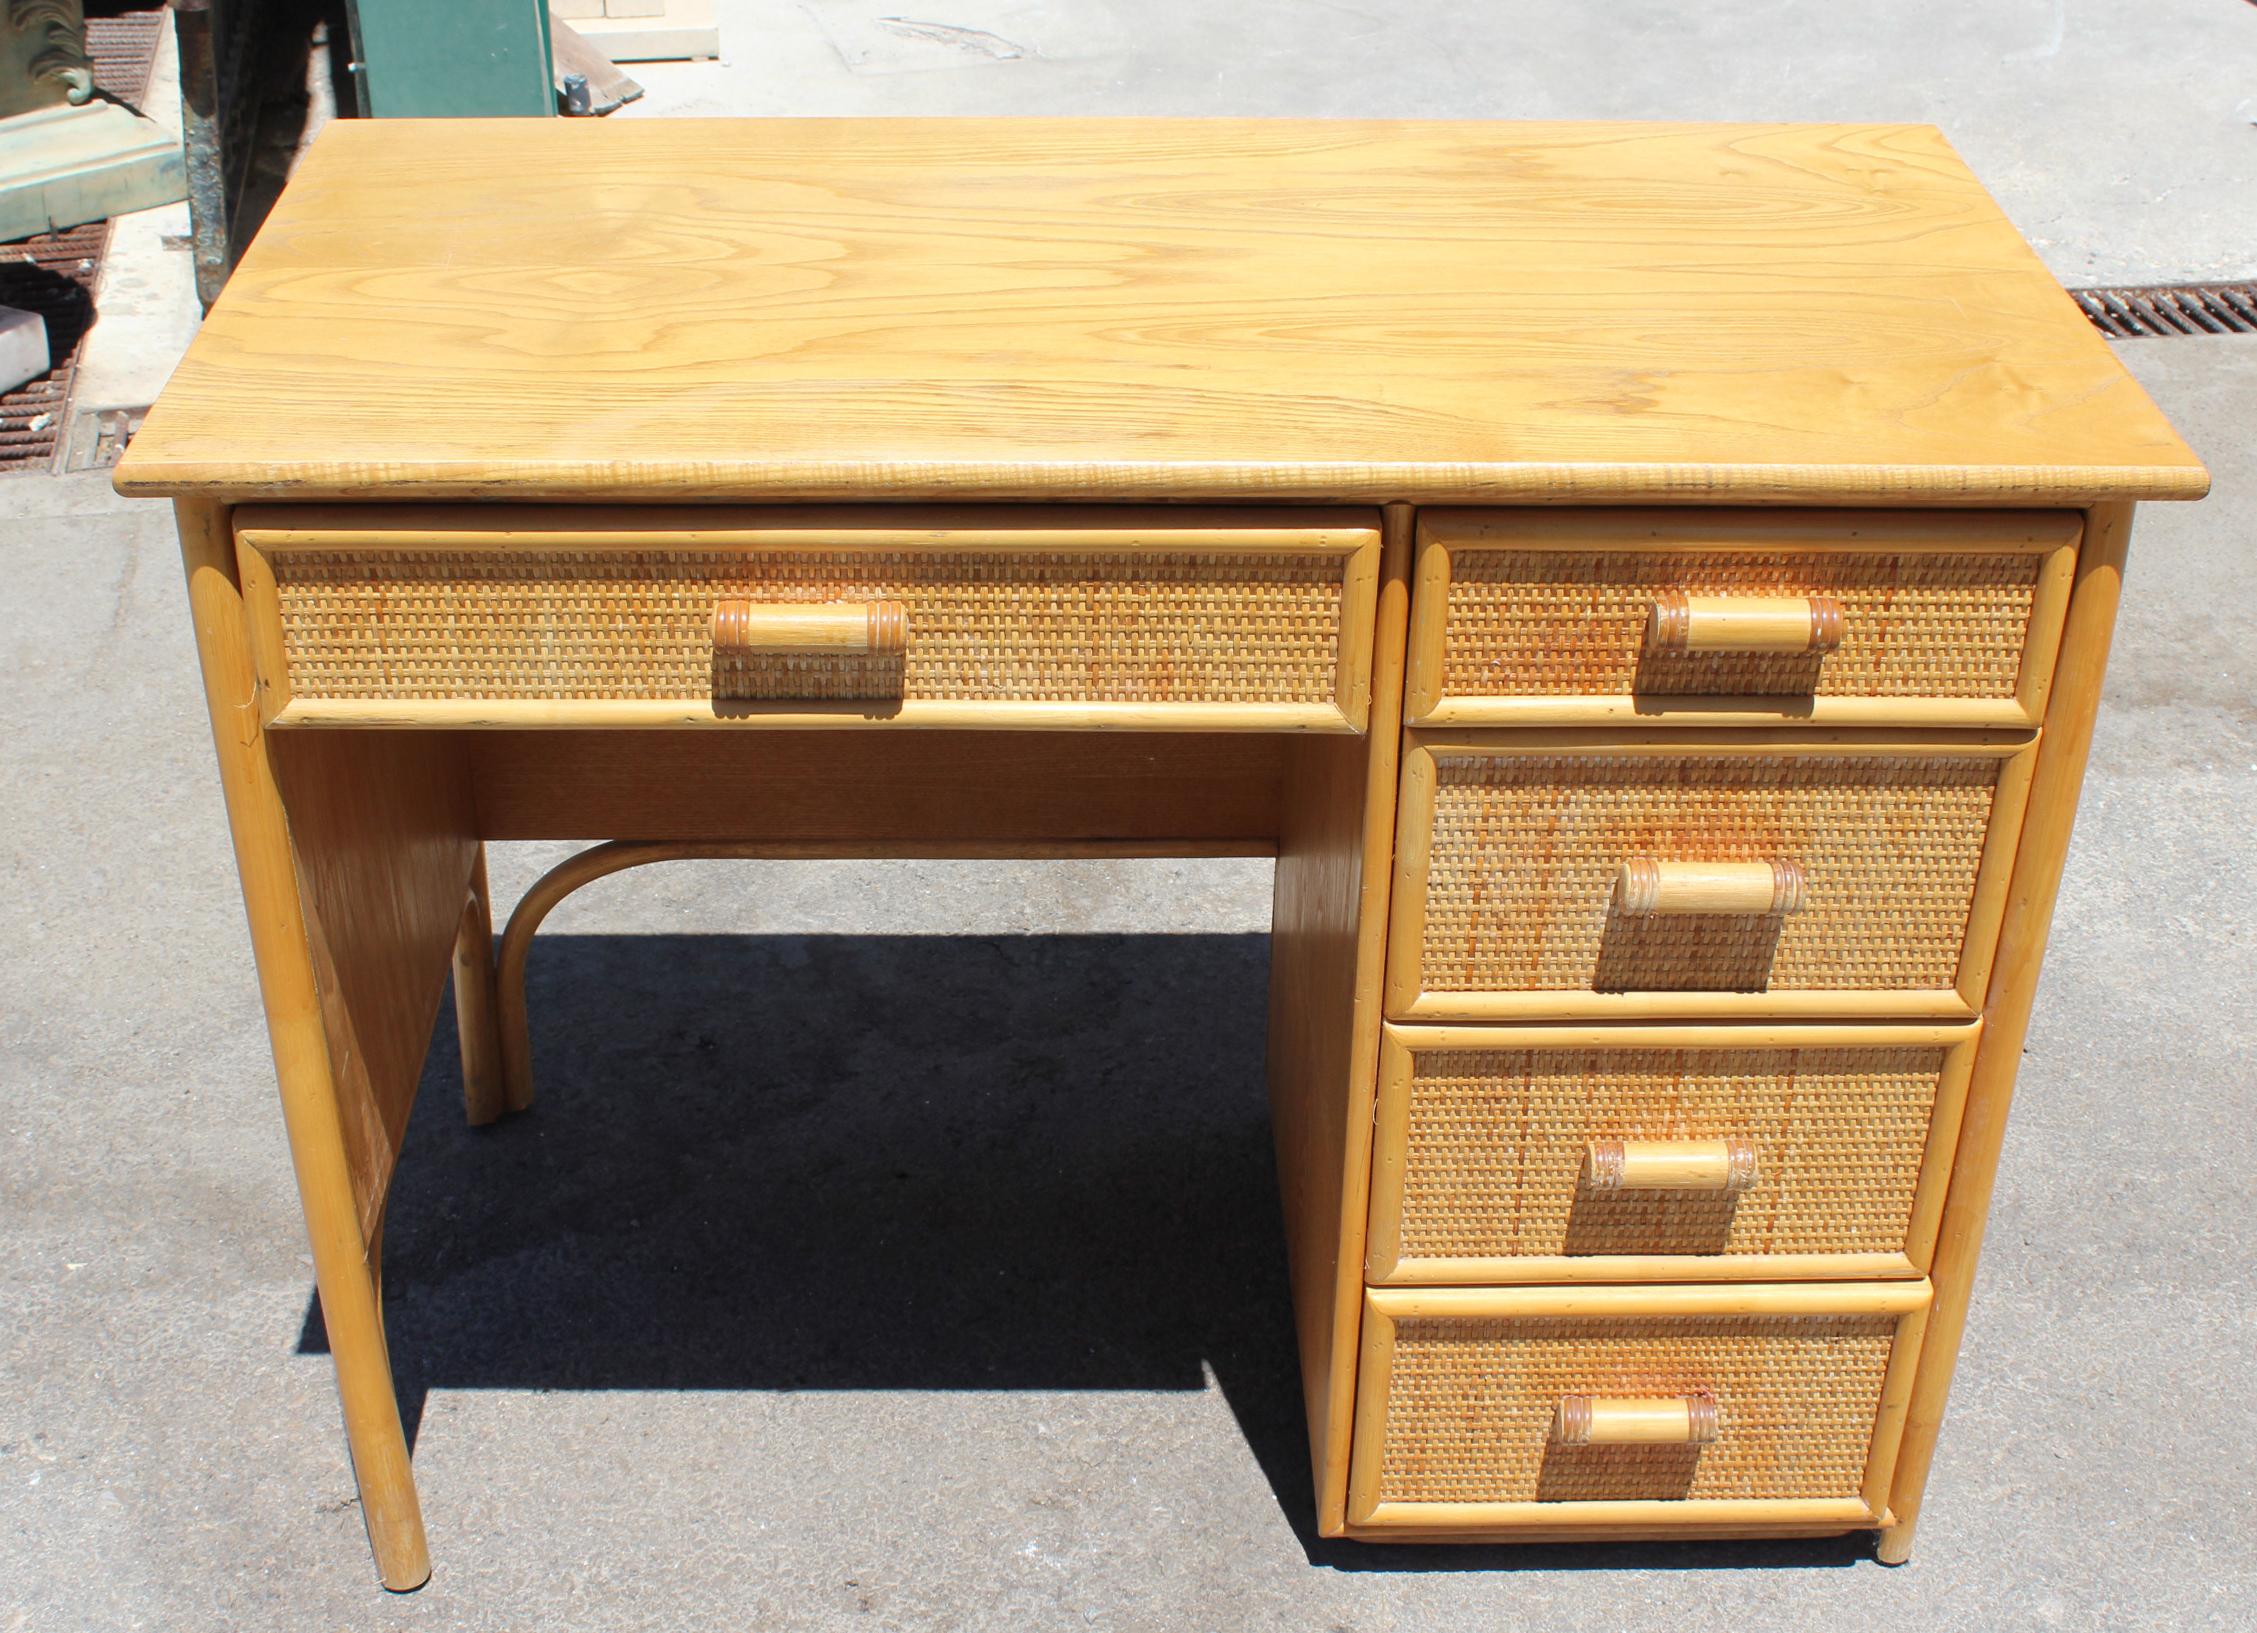 1980s bamboo and rattan desk with drawers.